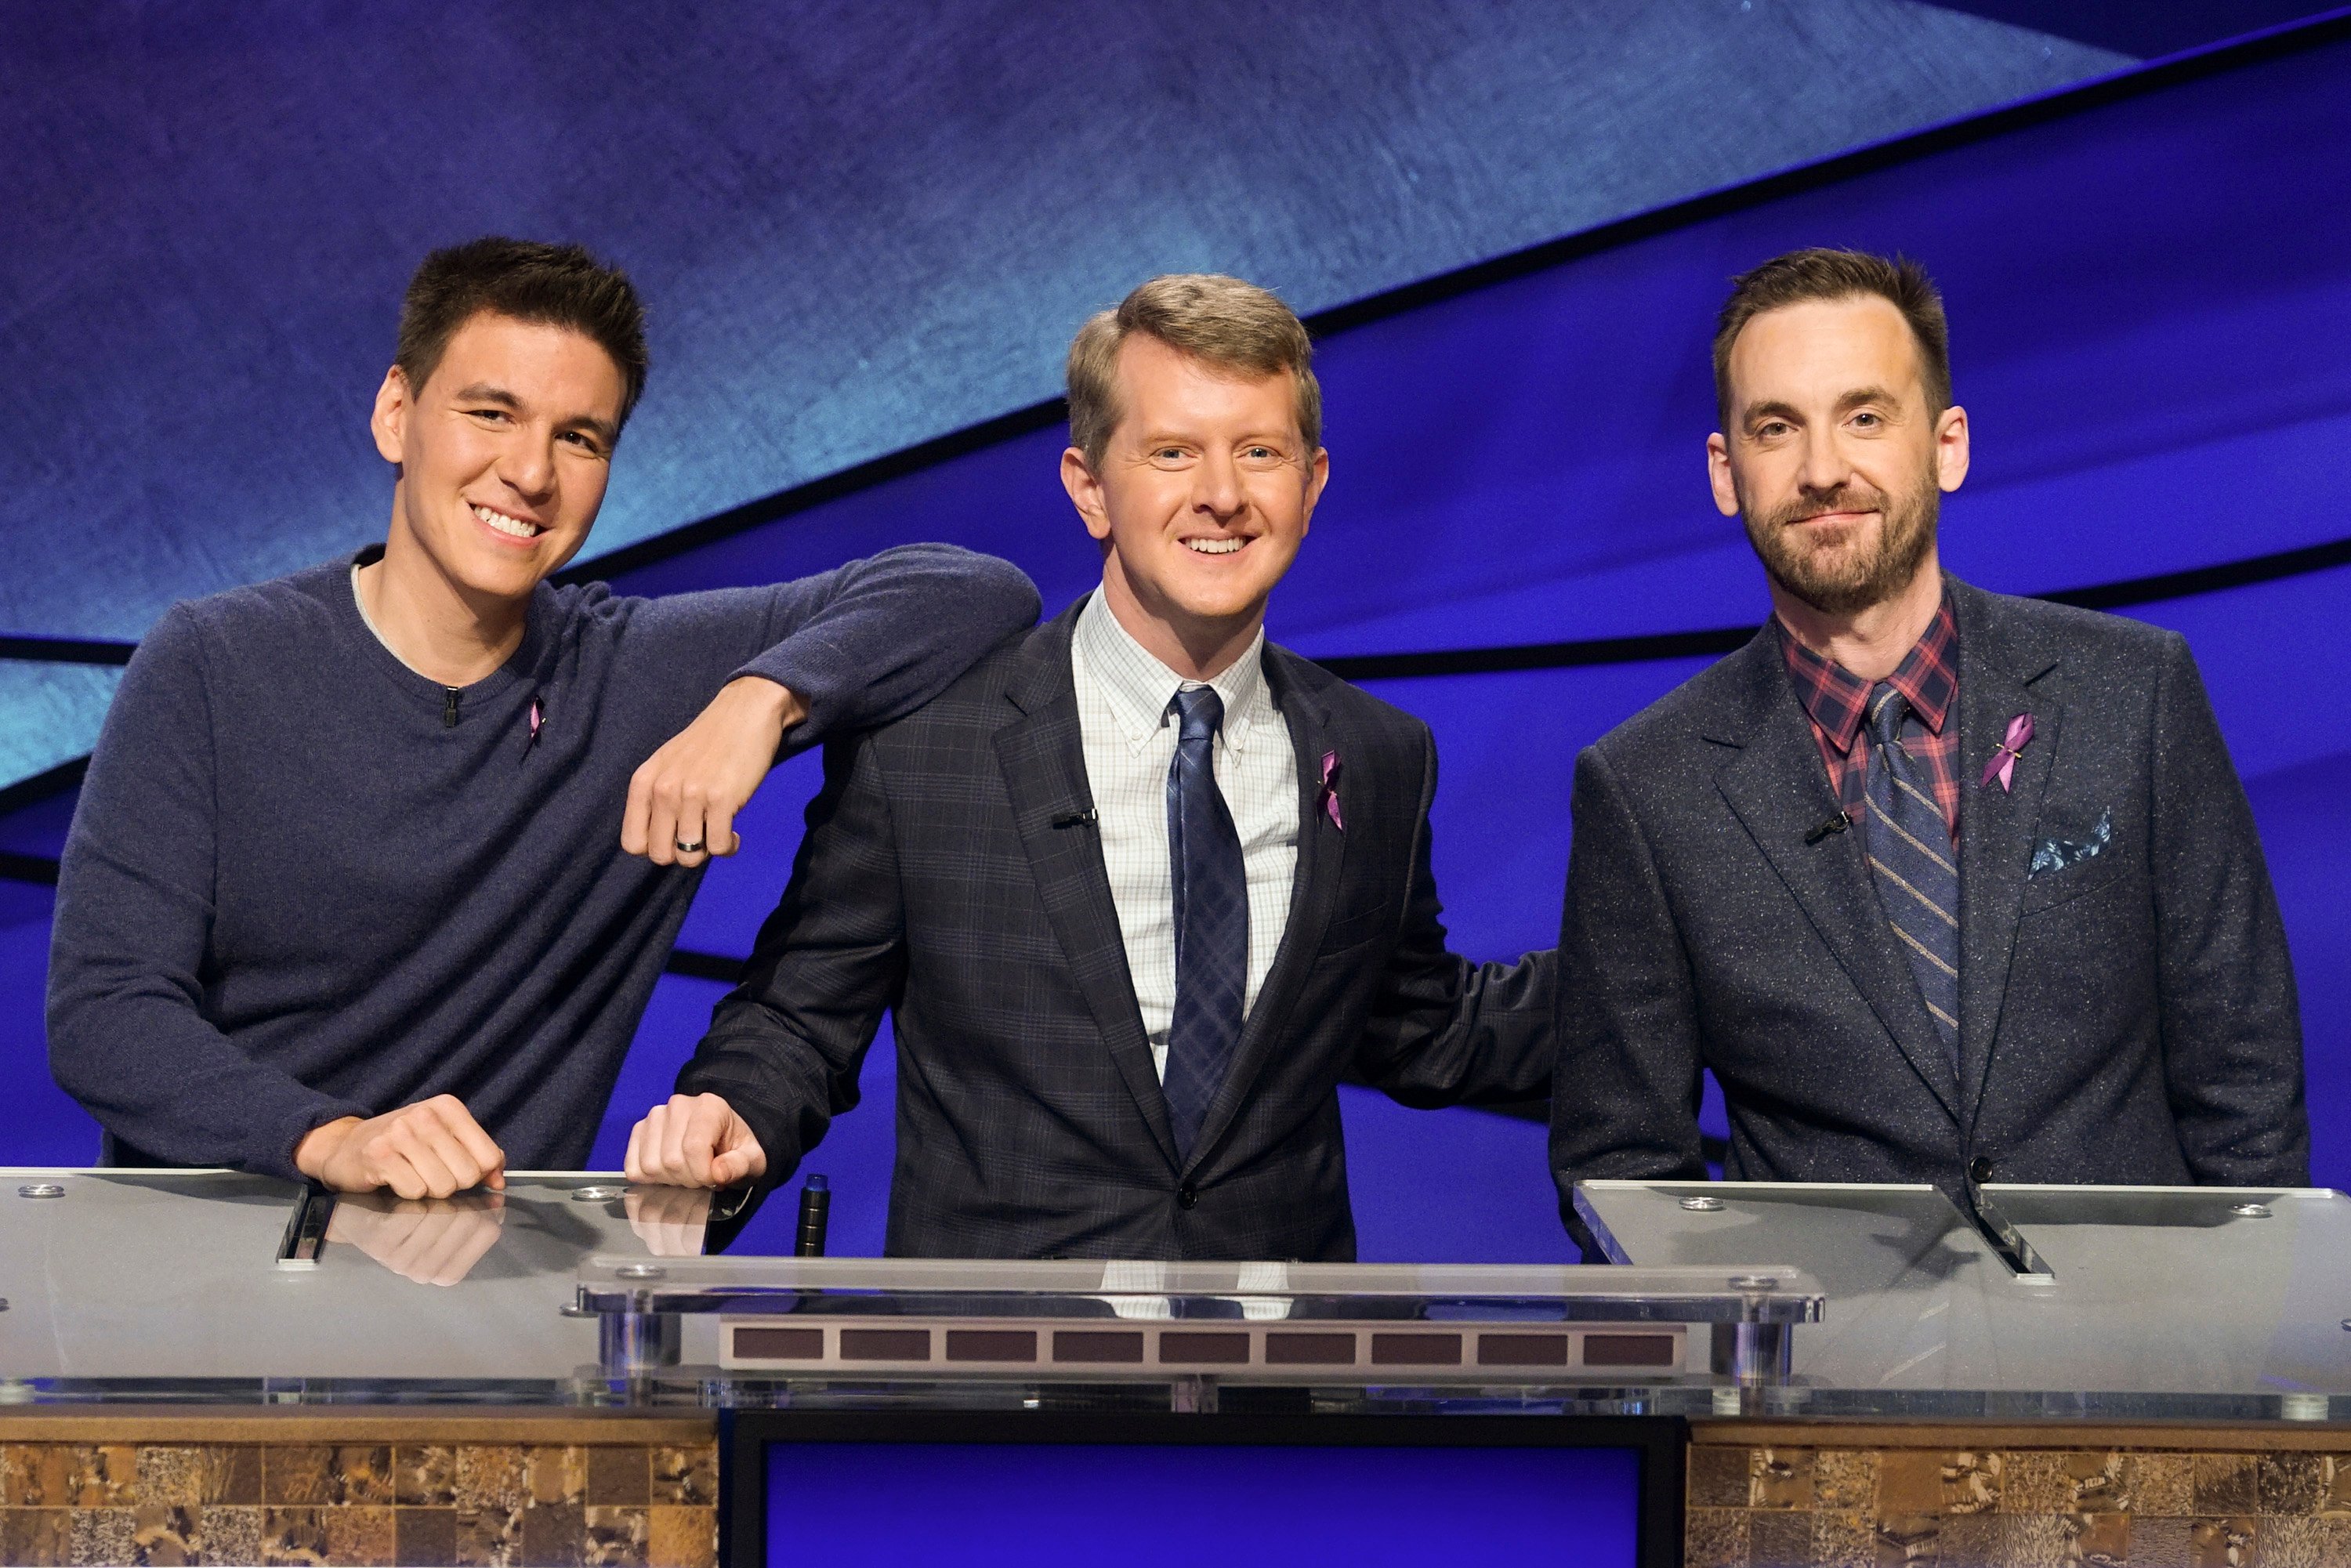 ‘Jeopardy!’ GOAT Ken Jennings Says James Holzhauer ‘Changed the Game’